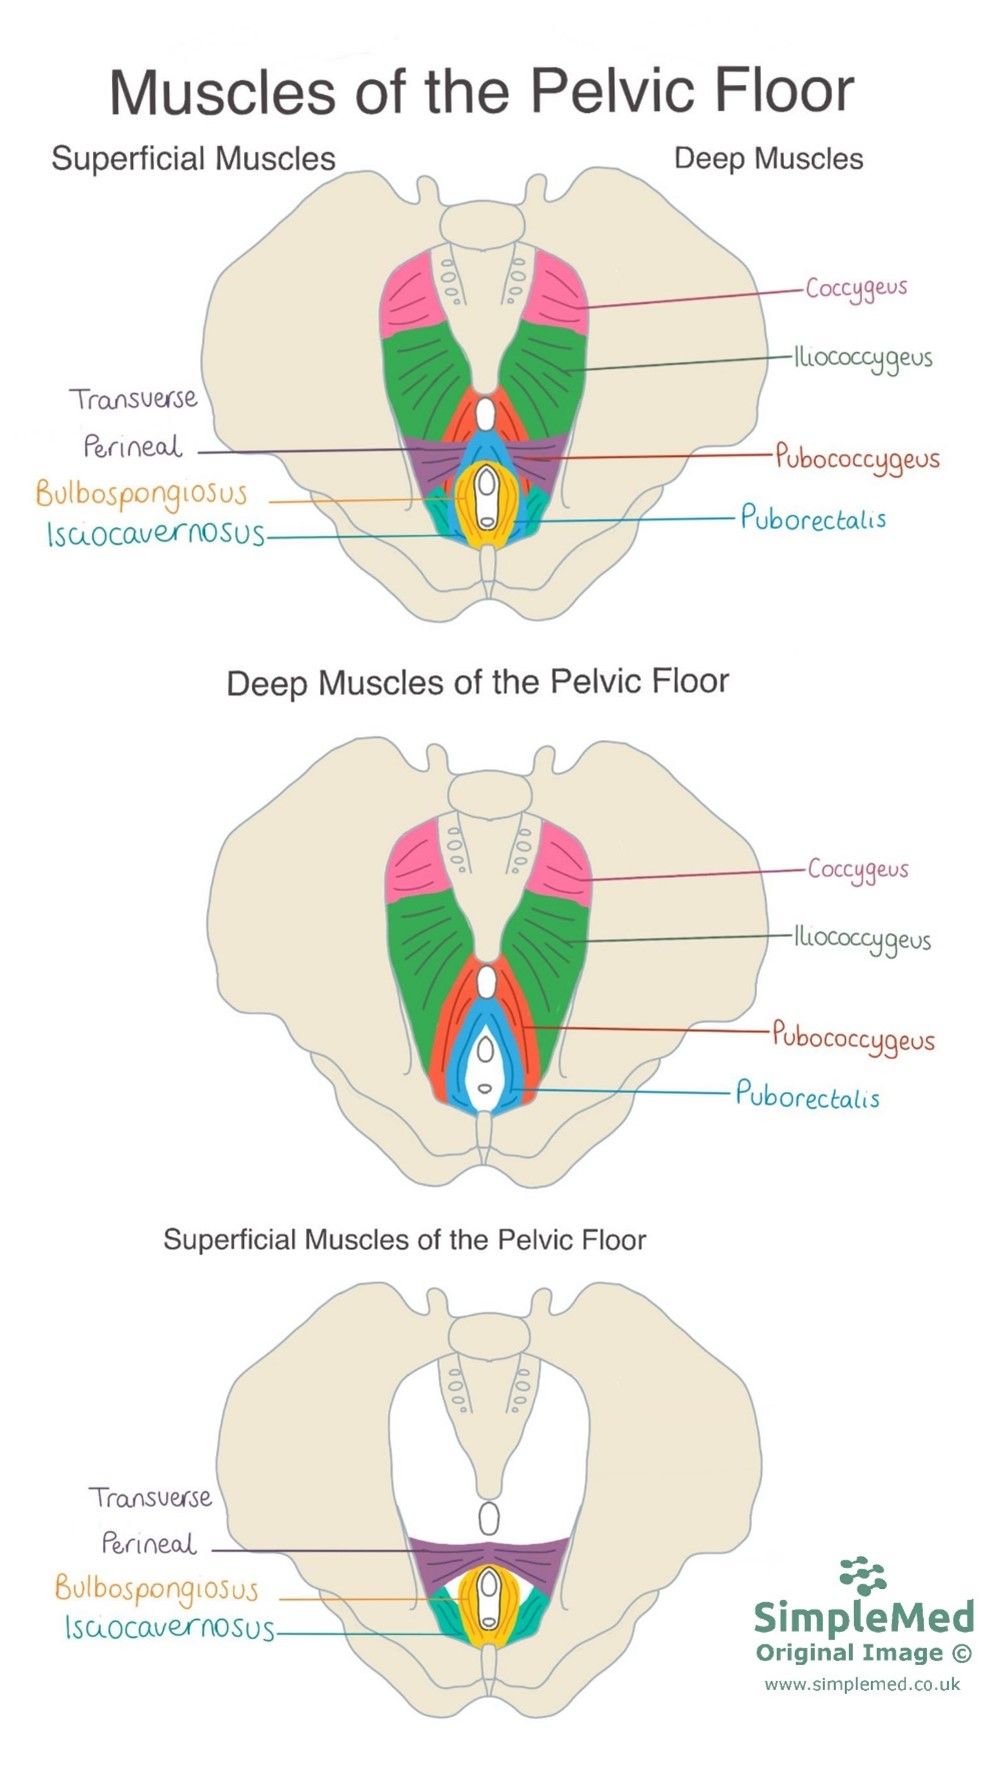 Muscles of the Pelvic Floor SimpleMed